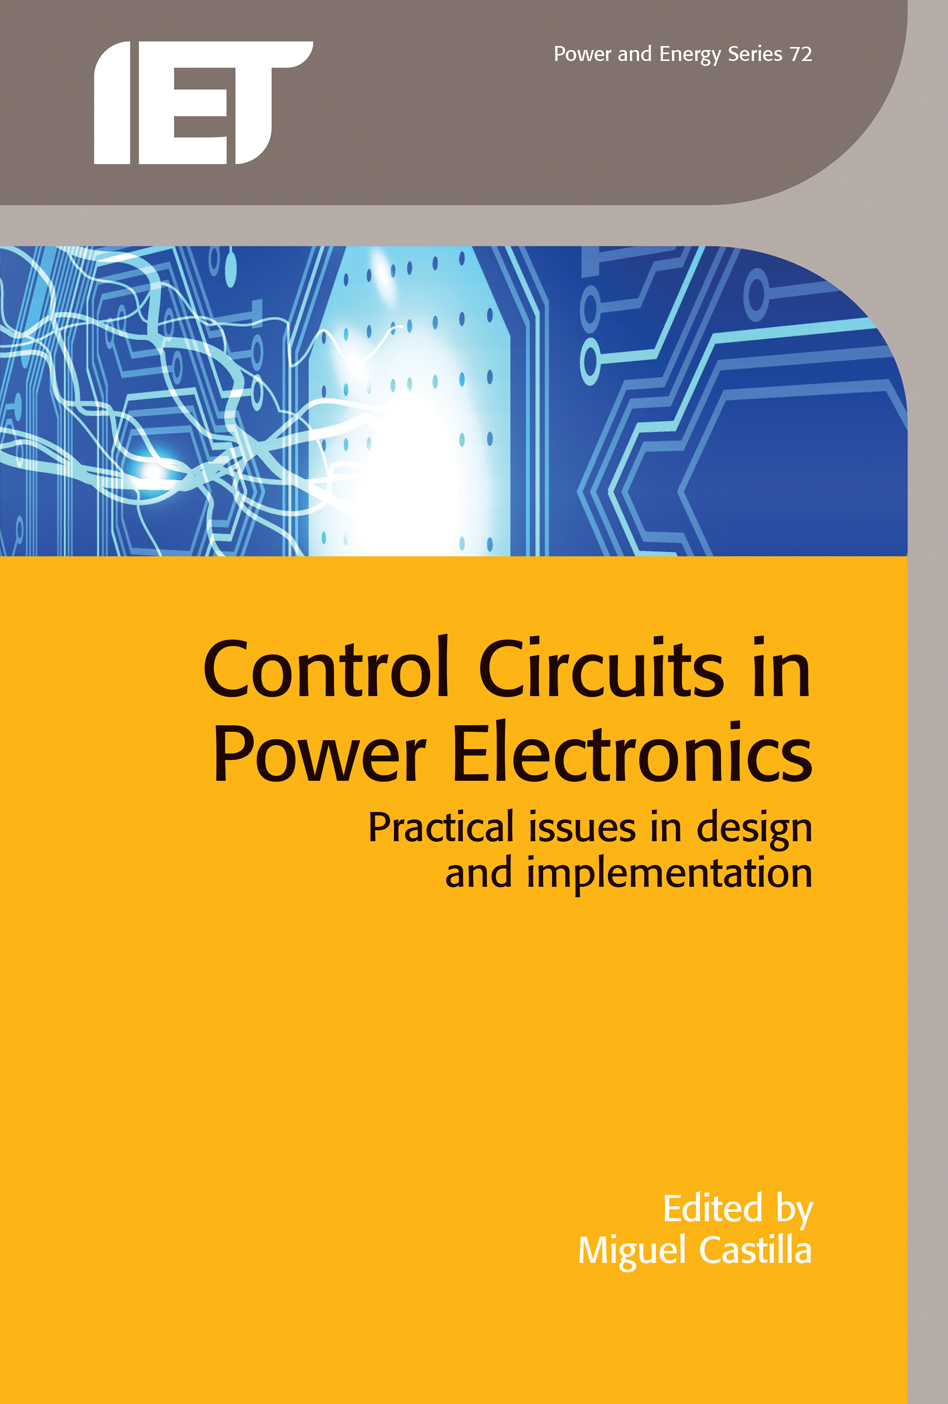 Control Circuits in Power Electronics, Practical issues in design and implementation